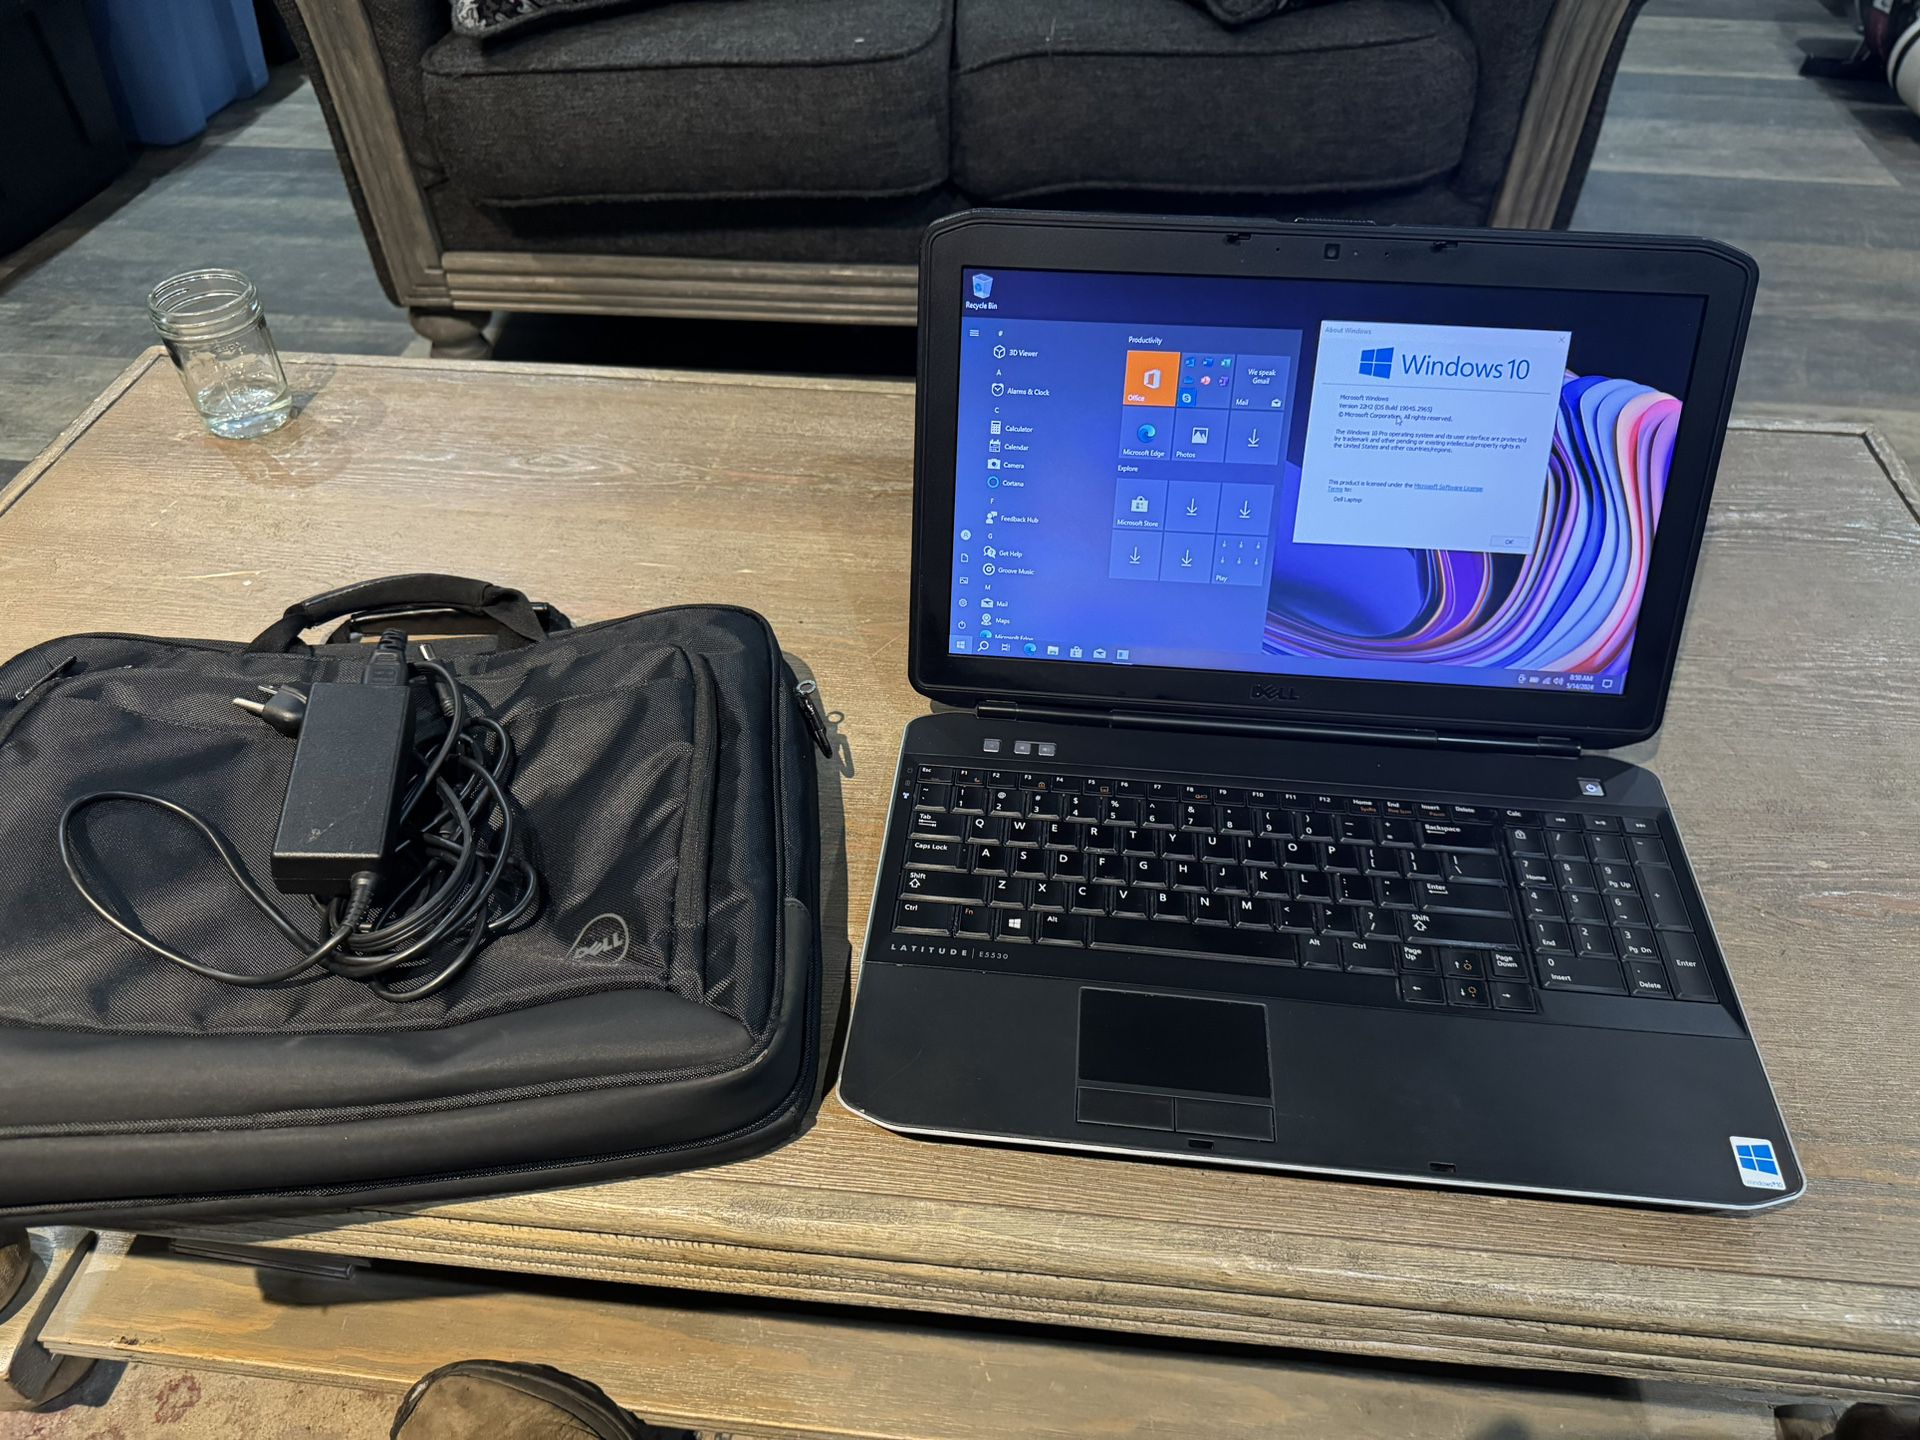 Dell Windows 10 Laptop And Bag